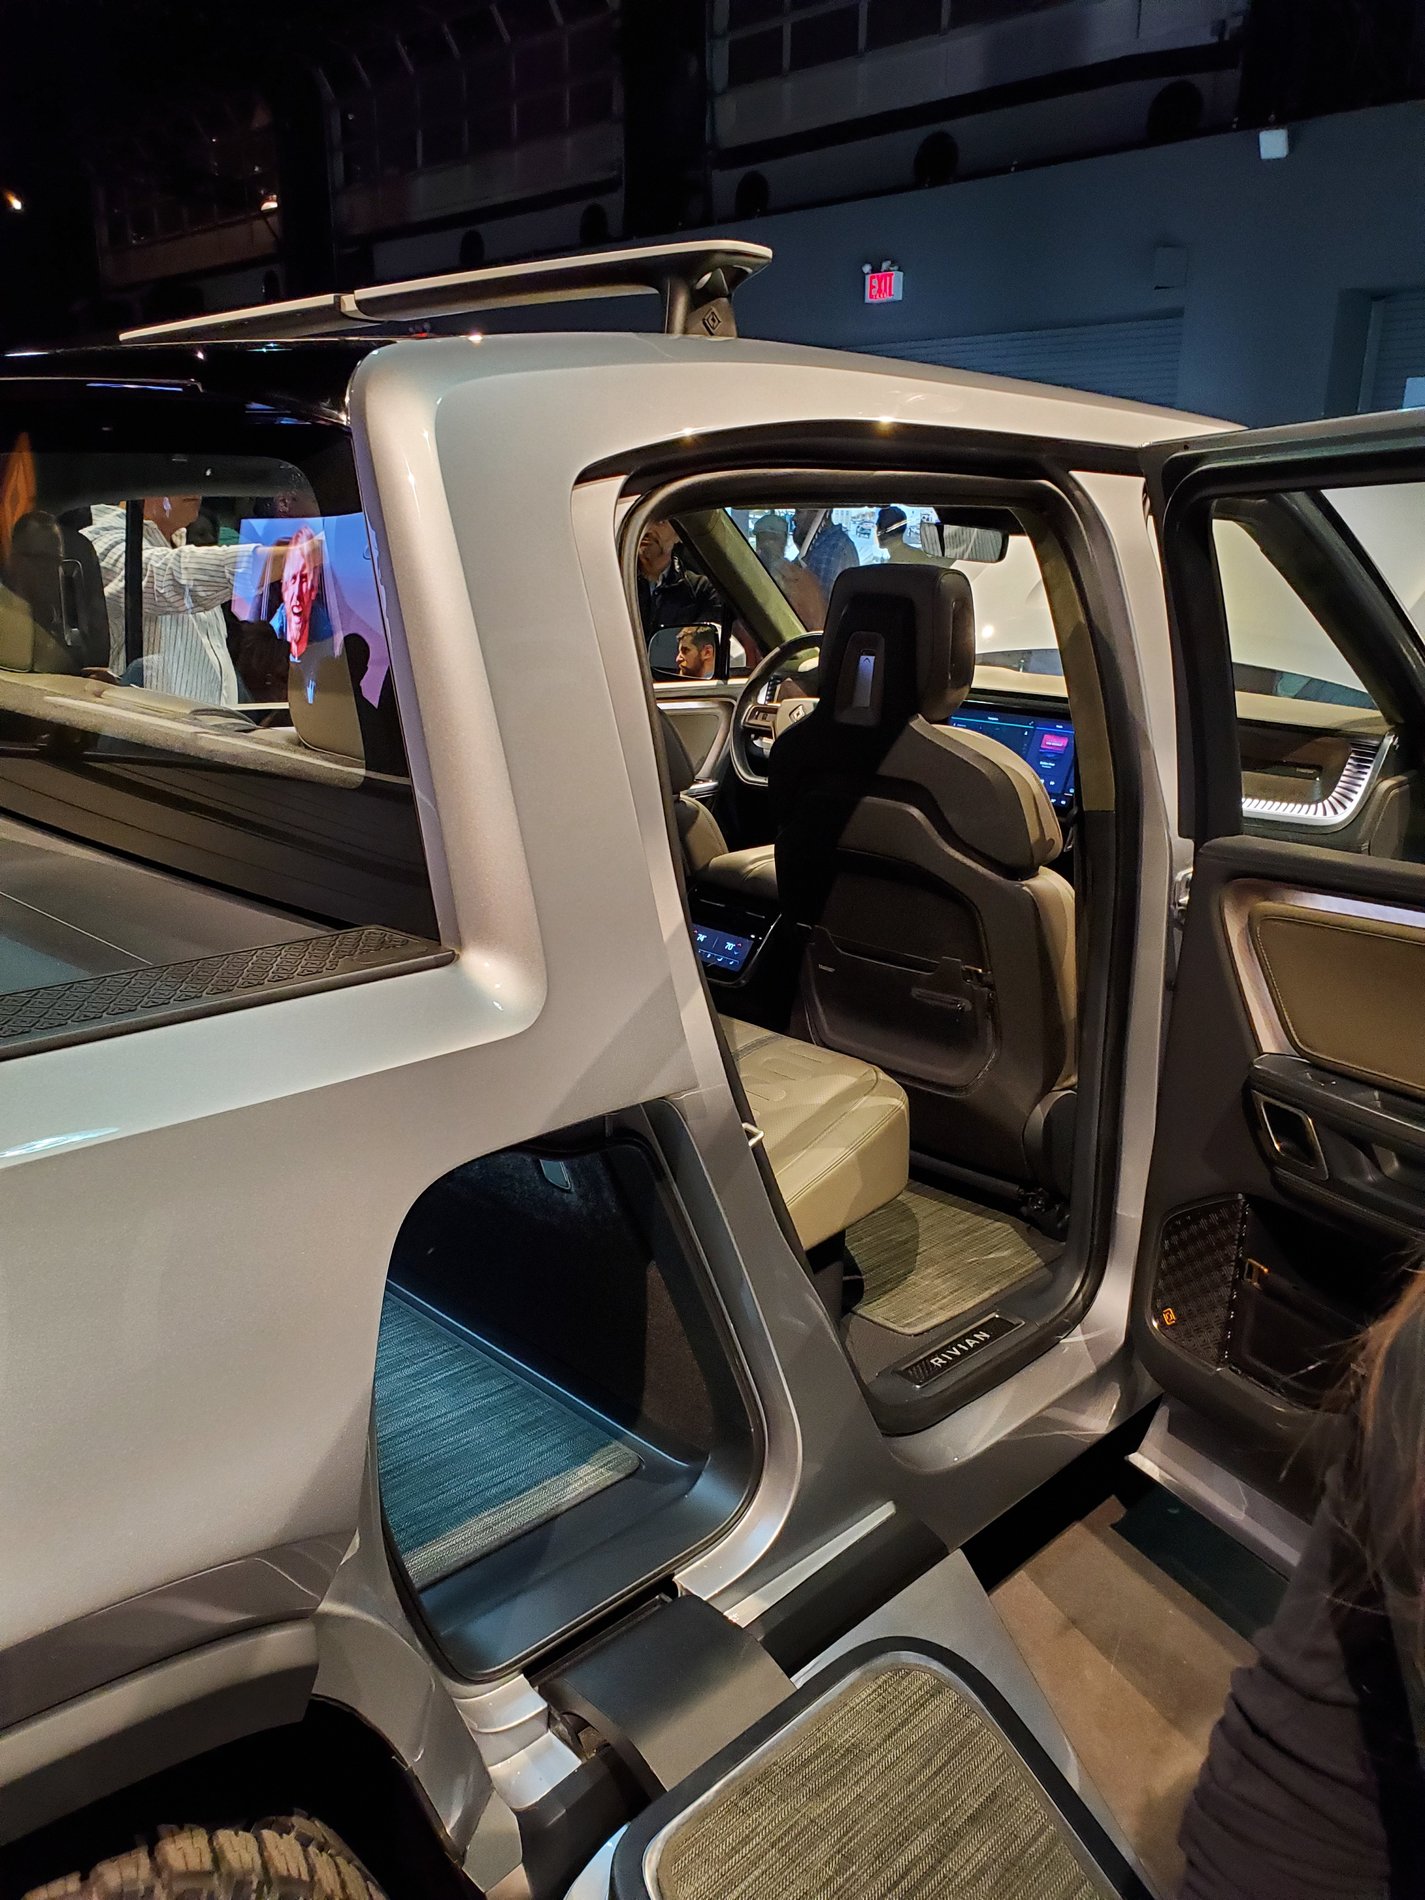 Rivian R1T R1S LIVE from Rivian's NY Auto Show Preview Event! (Q&A and R1T / R1S Hands-On) 20190412_200439